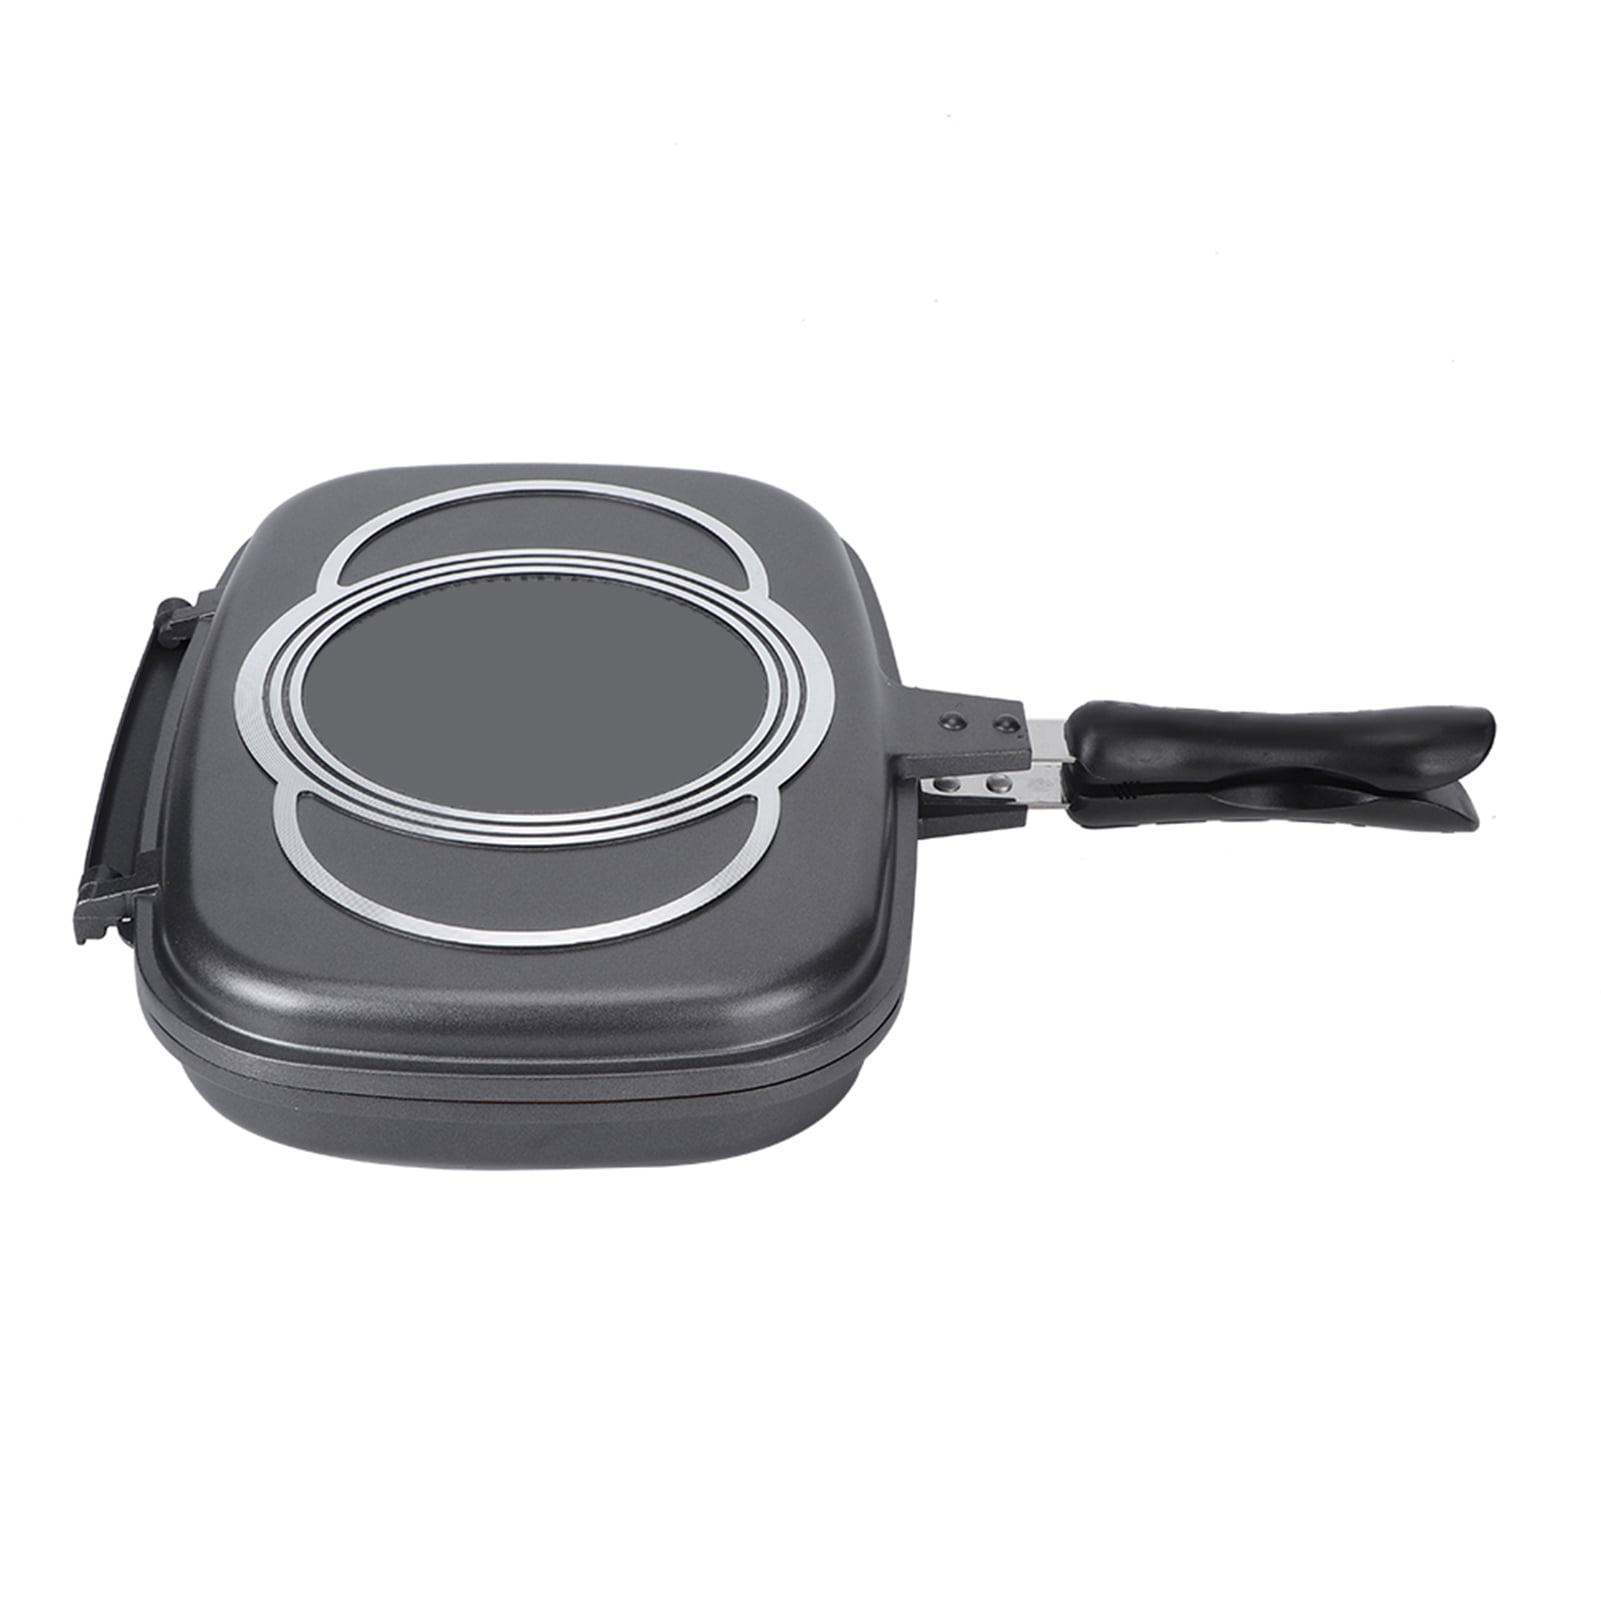 Off-Double Sided Non-Stick Frying Pan – Bravo Goods